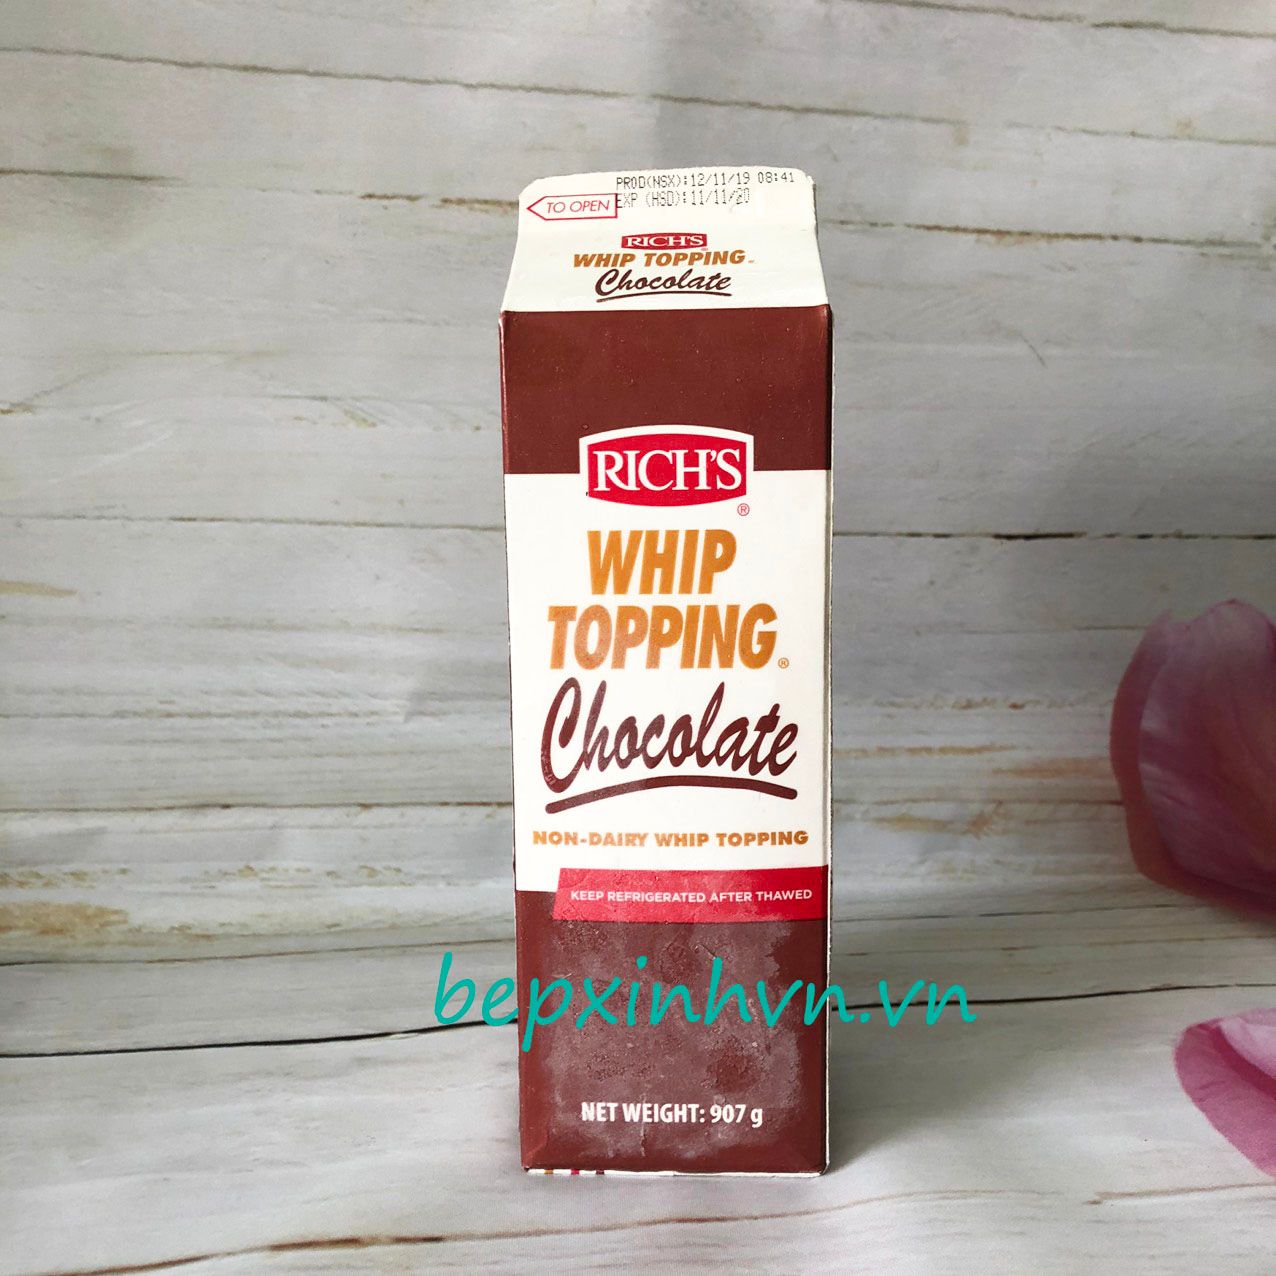 Whip Topping Chocolate rich's